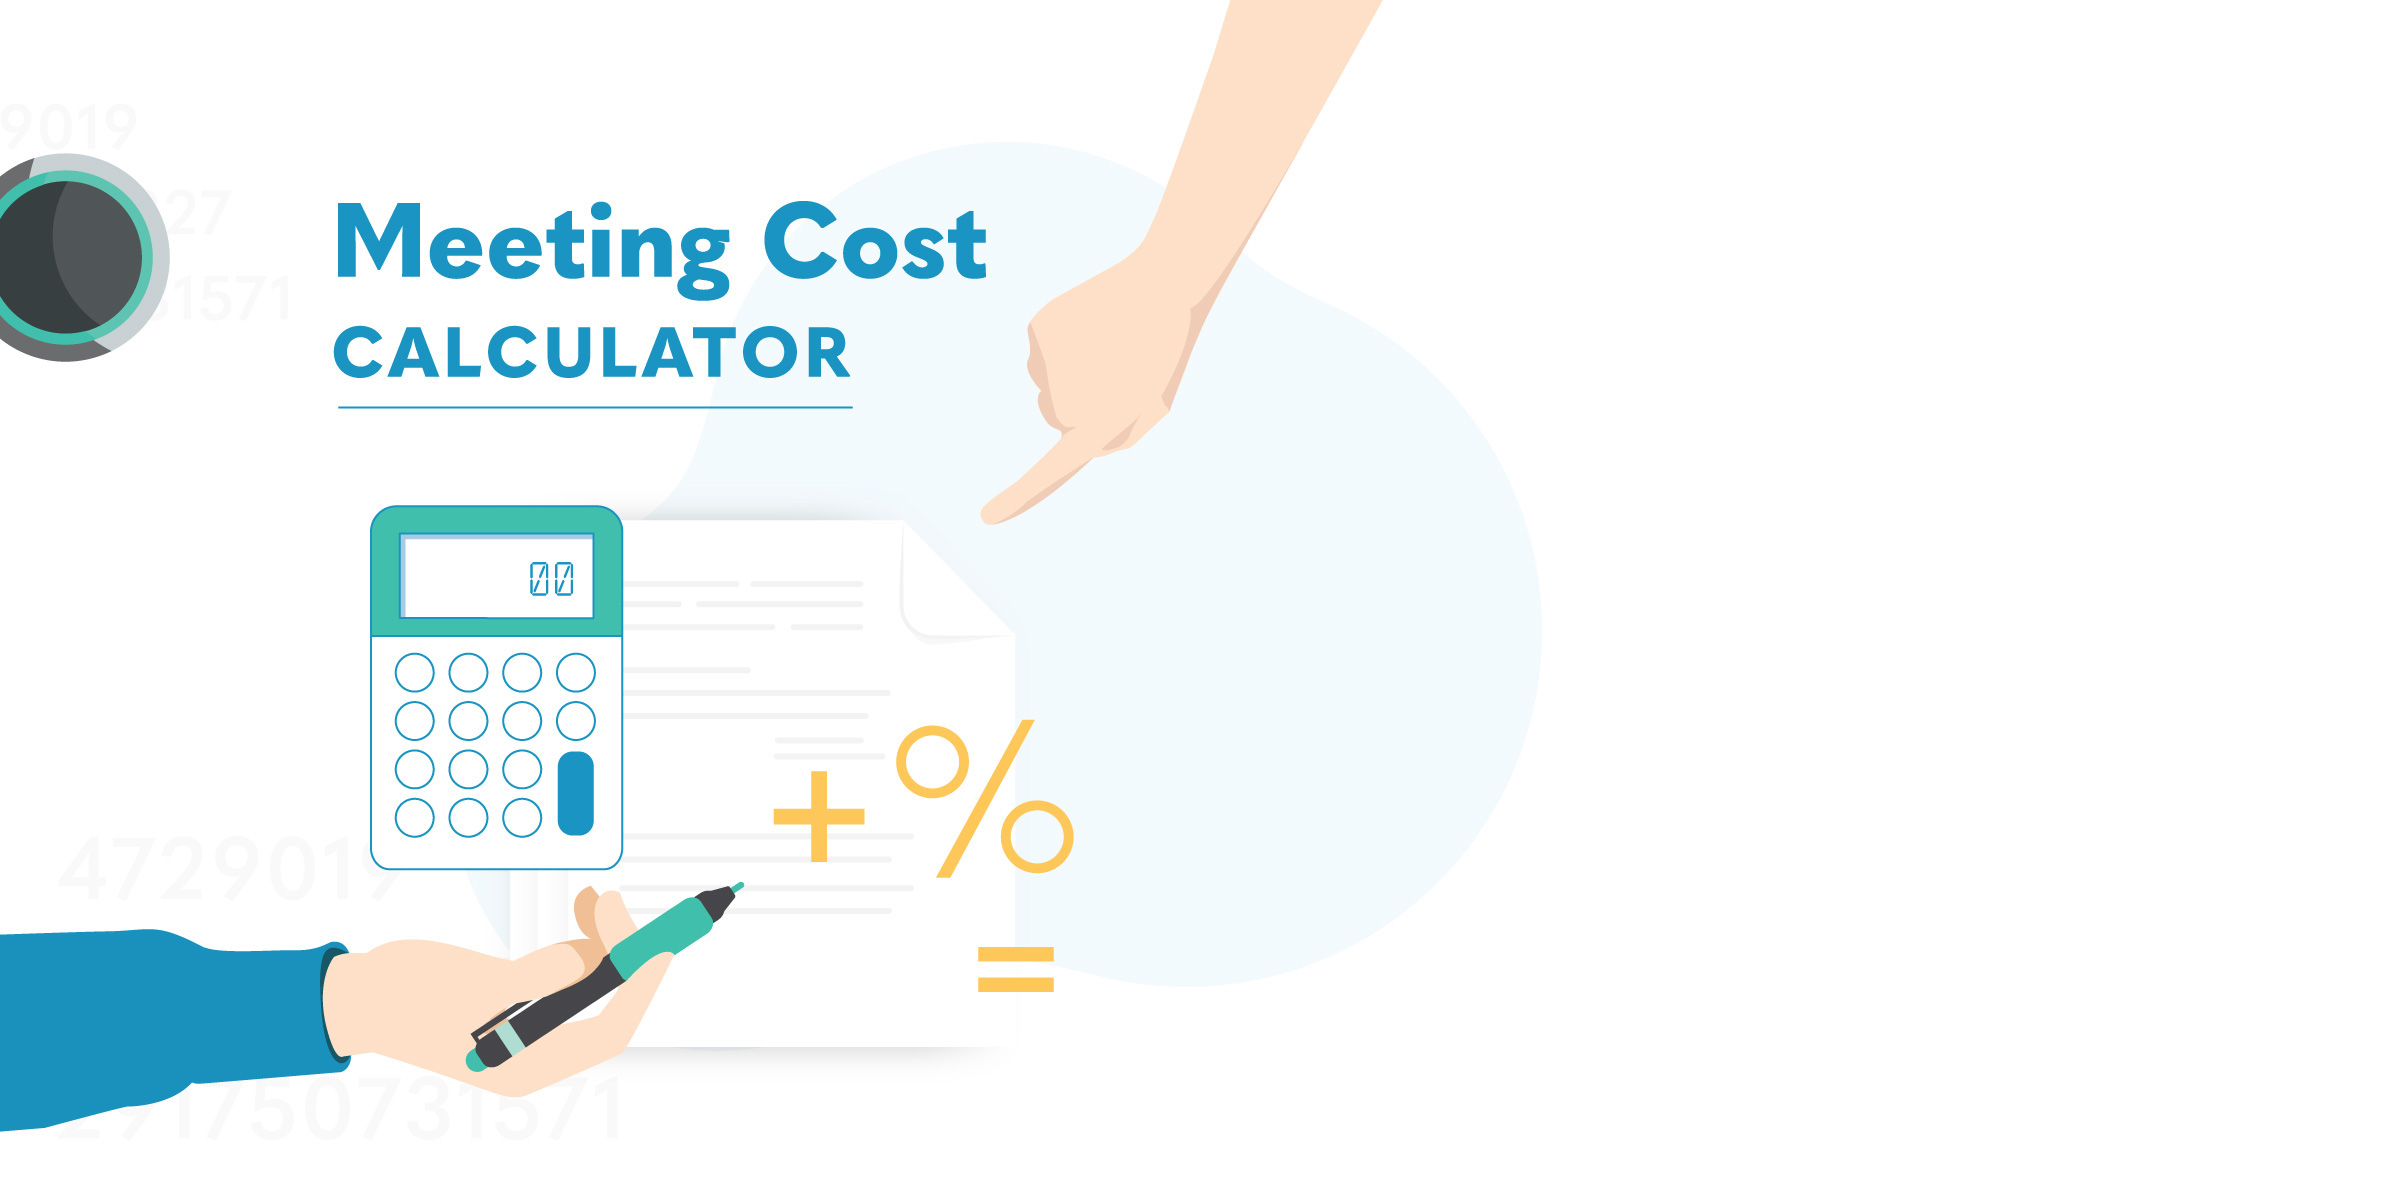 Meeting Cost Calculator by Owl Labs